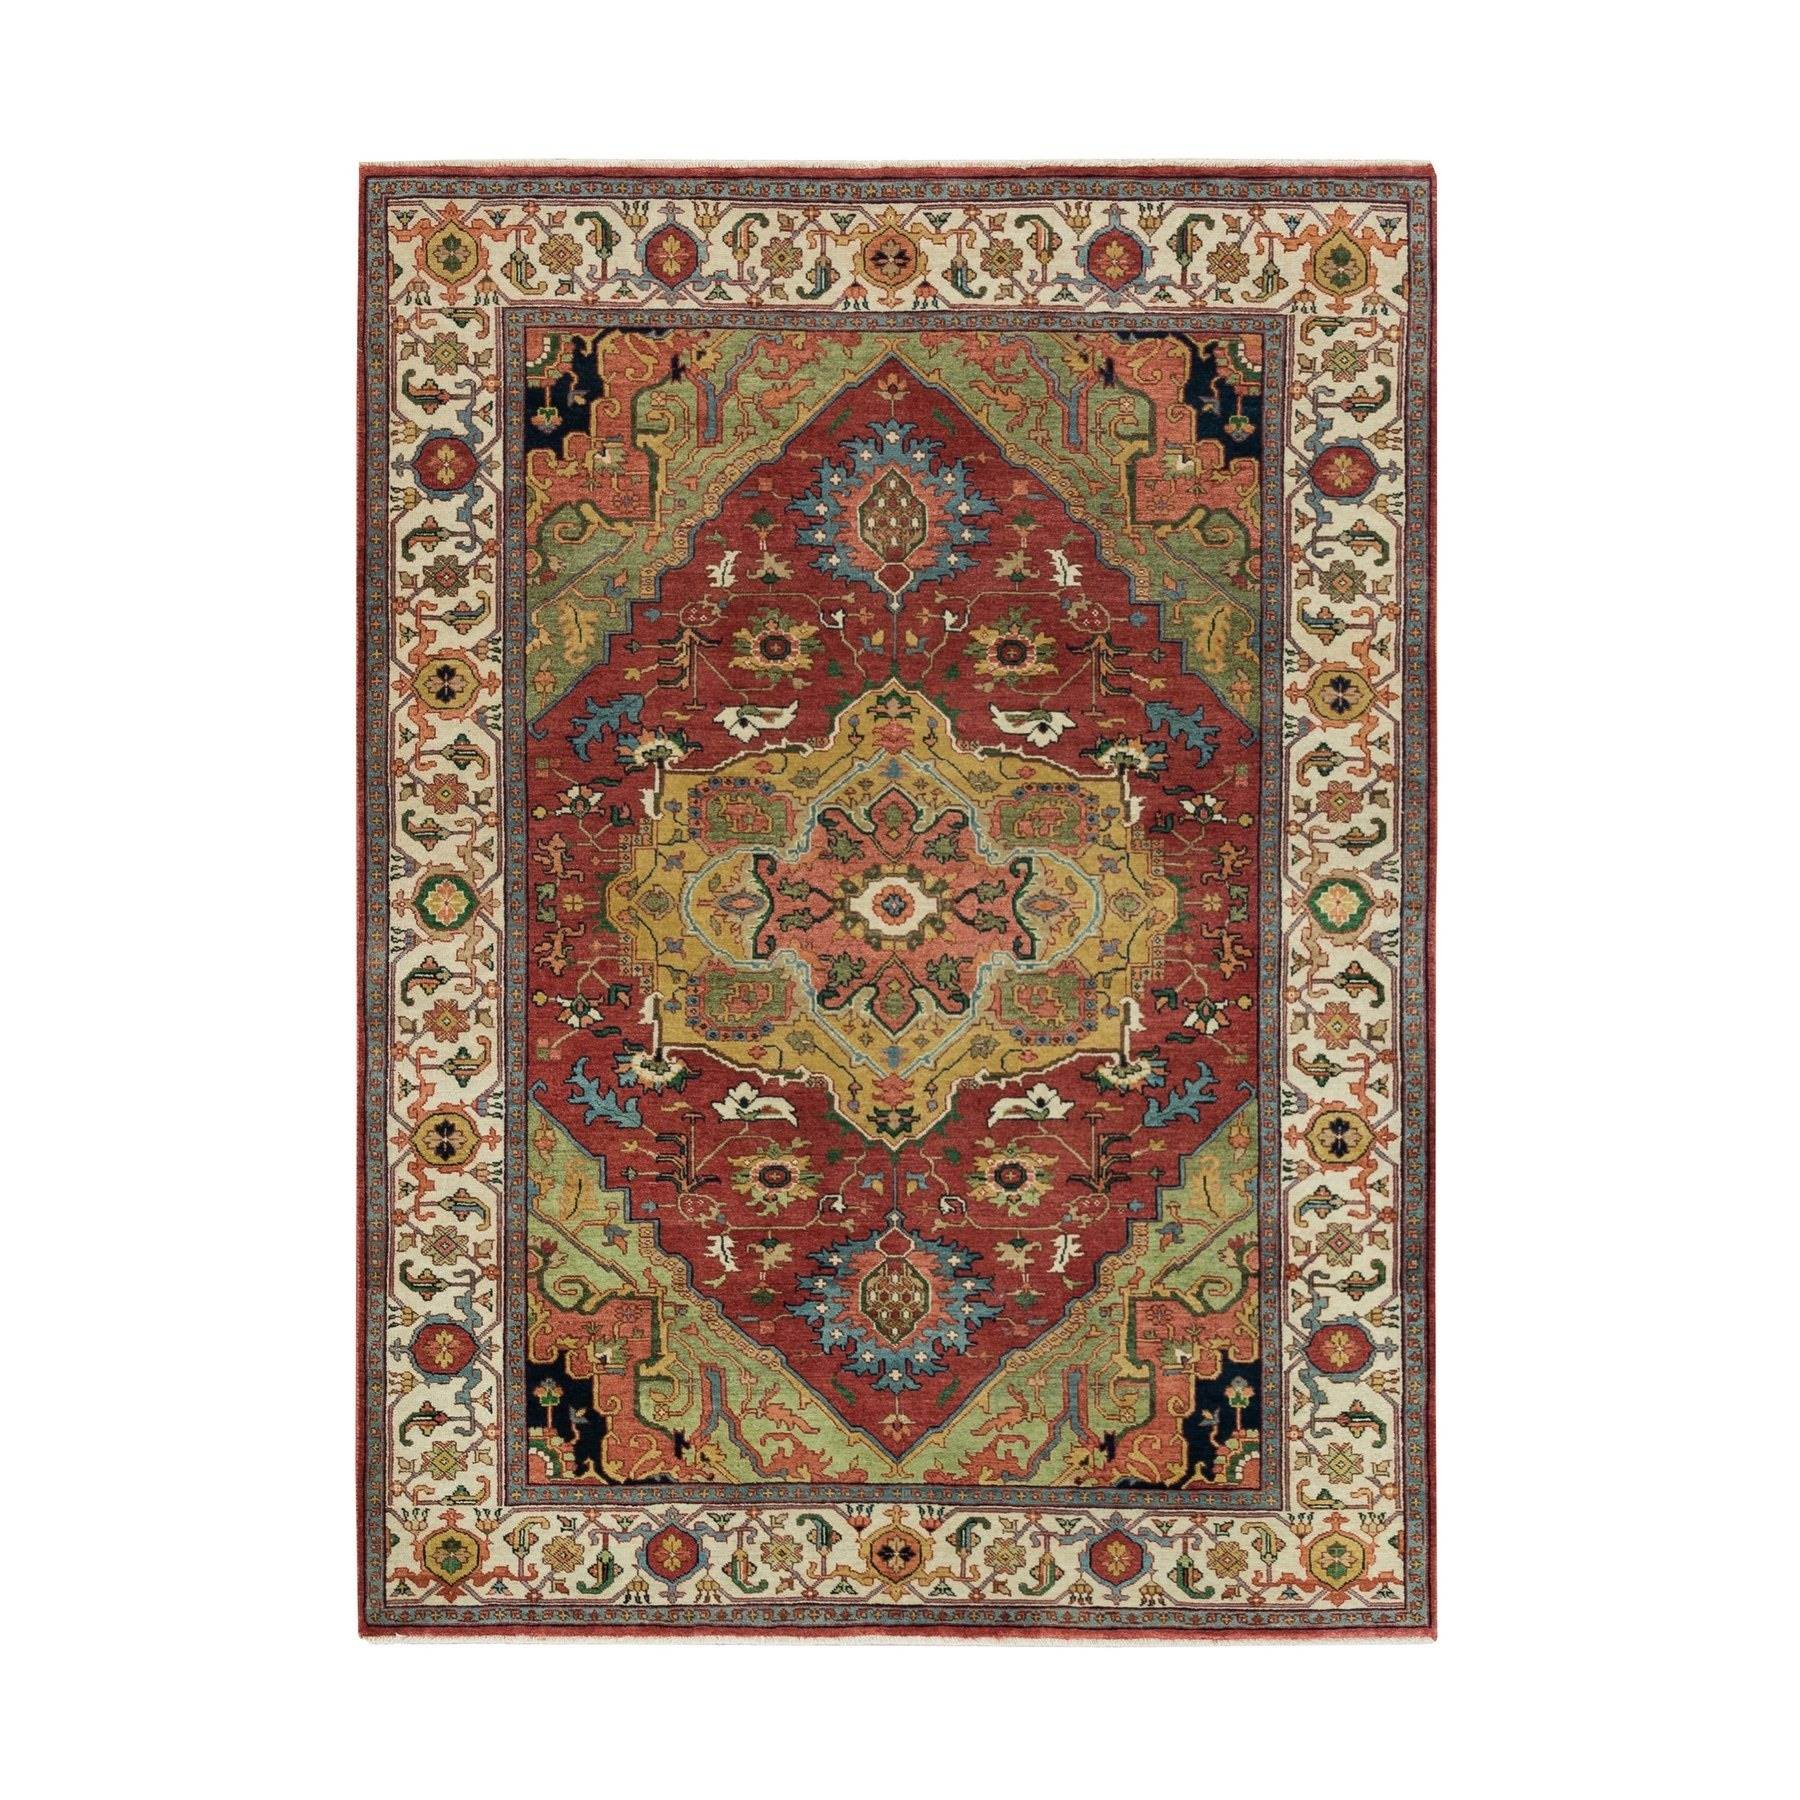 5'1"x7'1" Vermilion Red, Vegetable Dyes, Extra Soft Wool, Dense Weave, Hand Woven, Antiqued Fine Heriz Re-Creation, Oriental Rug 